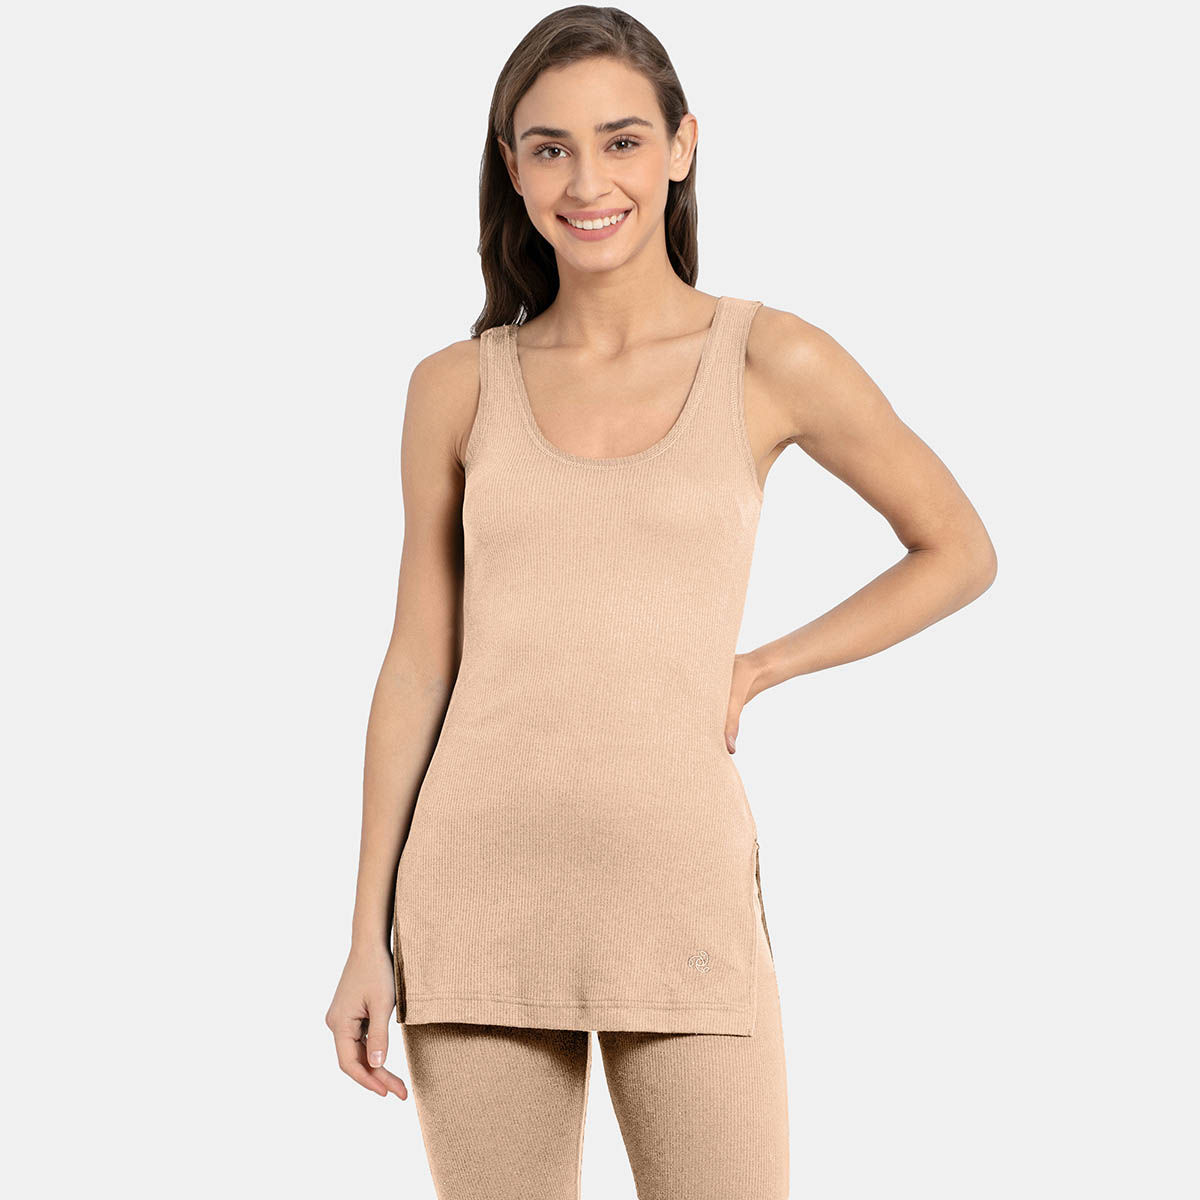 JOCKEY LADIES THERMAL CAMISOLE 2500- LOW NECK DESIGN- SNUG TAILORED FIT-  LONG